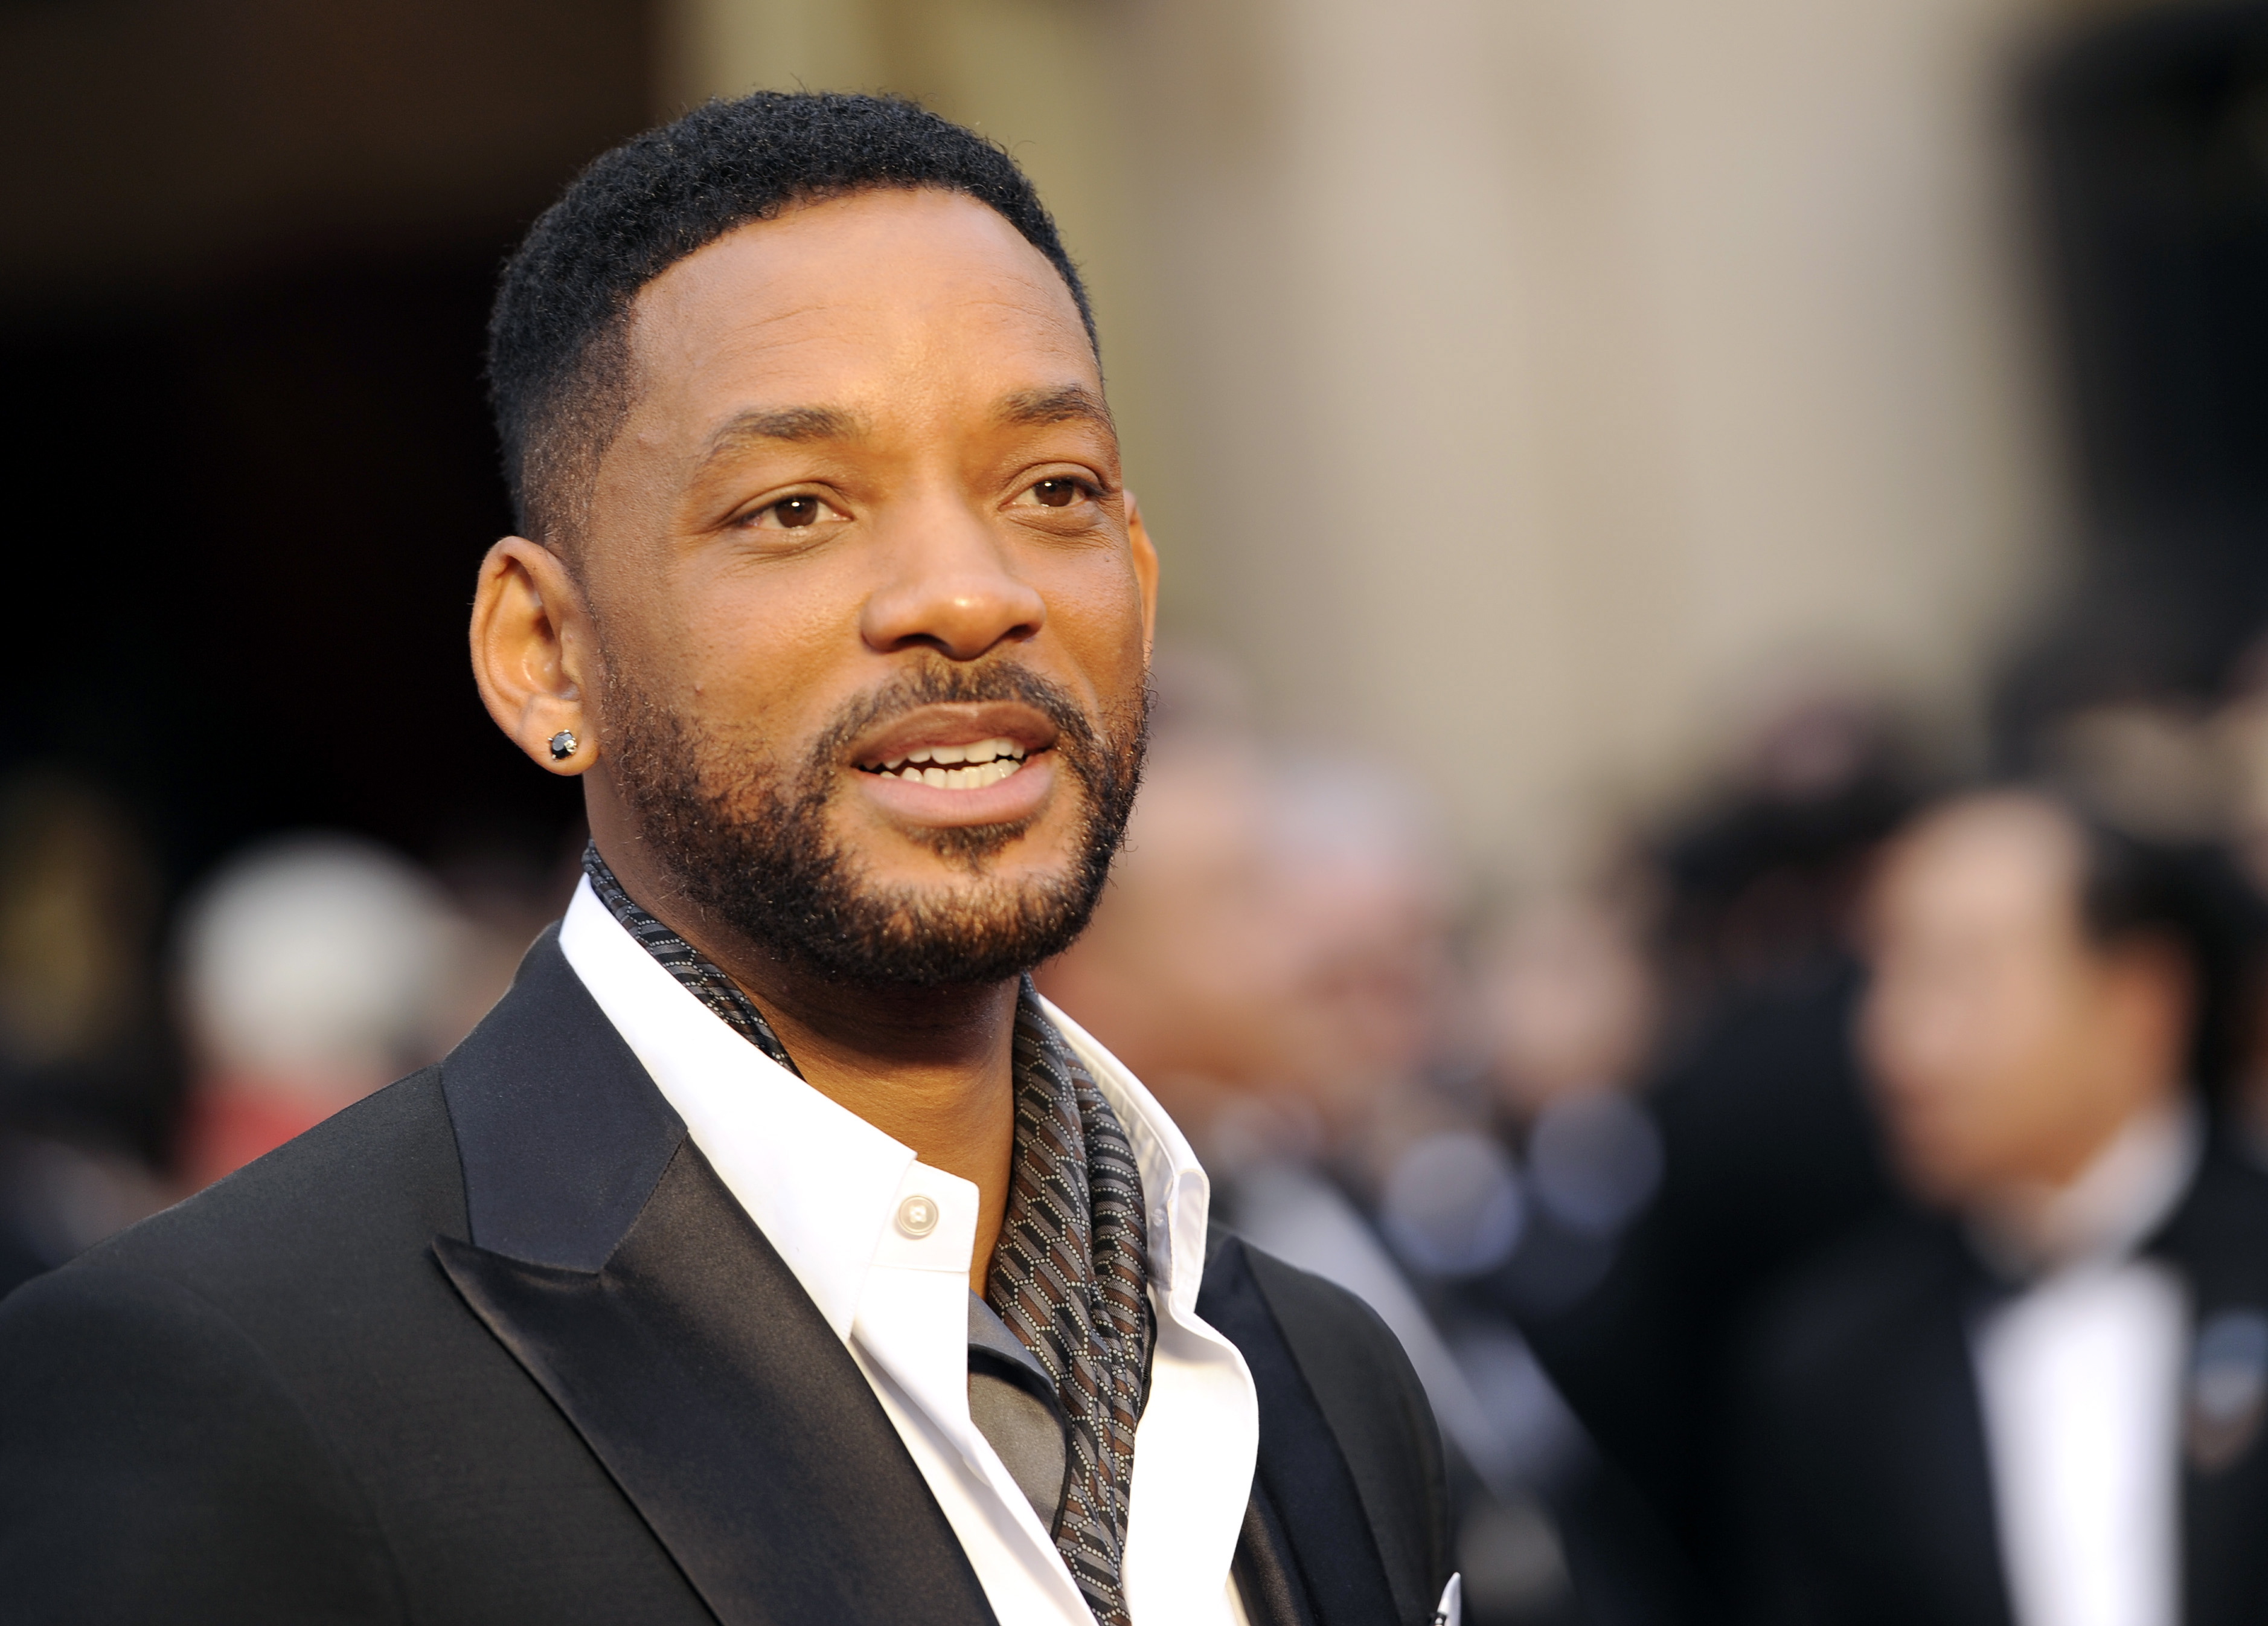 Will Smith Pics, Celebrity Collection